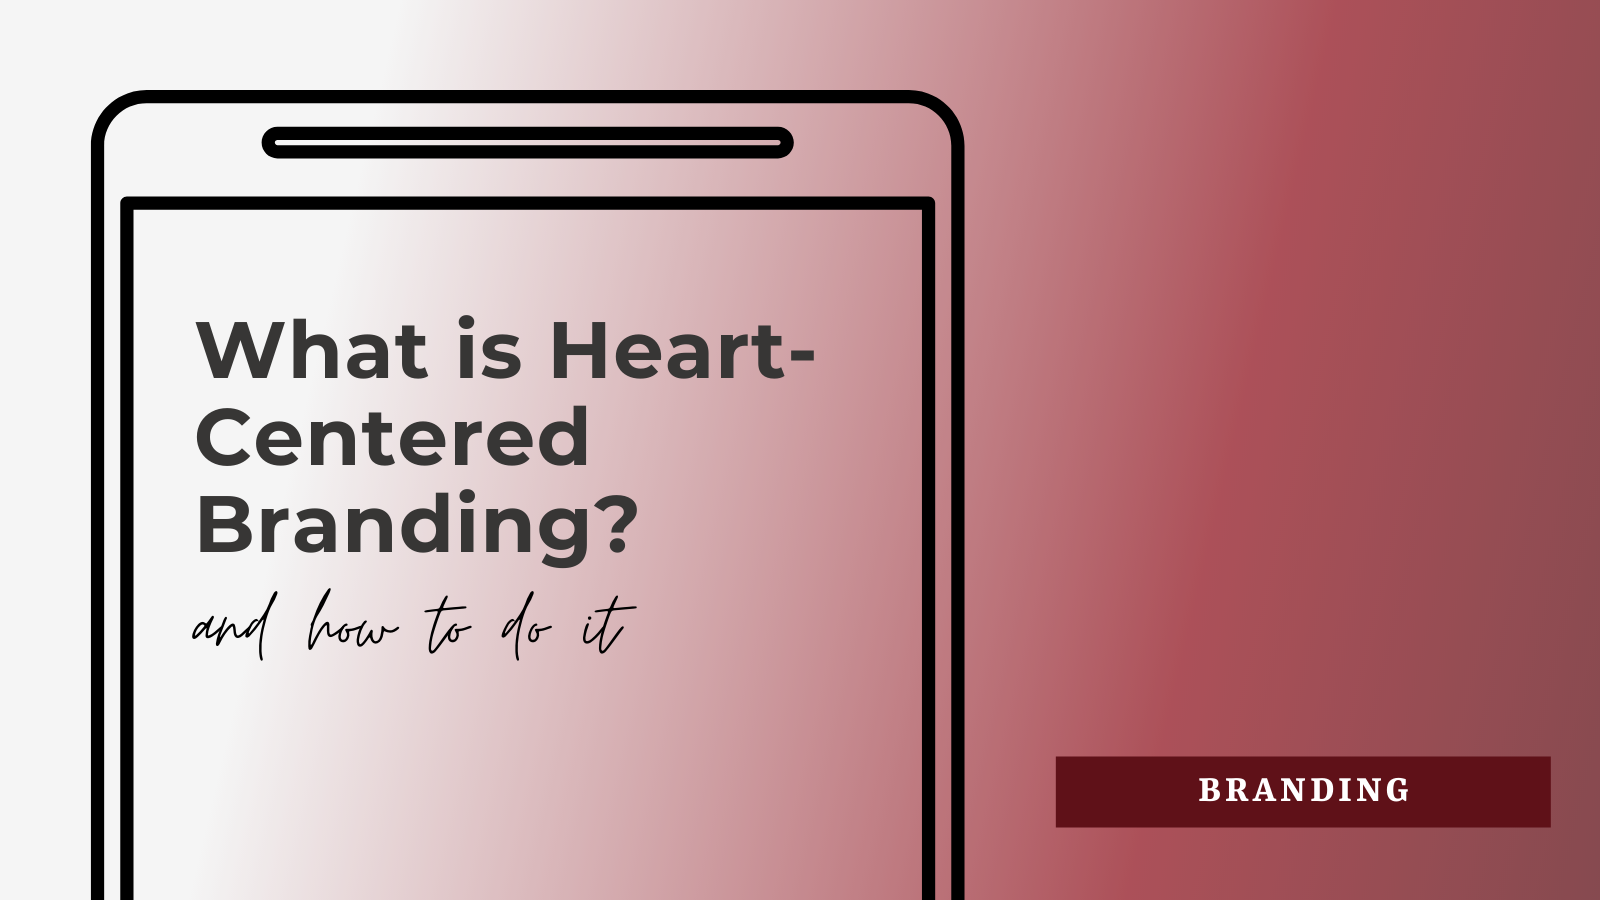 What does heart-centered branding mean?